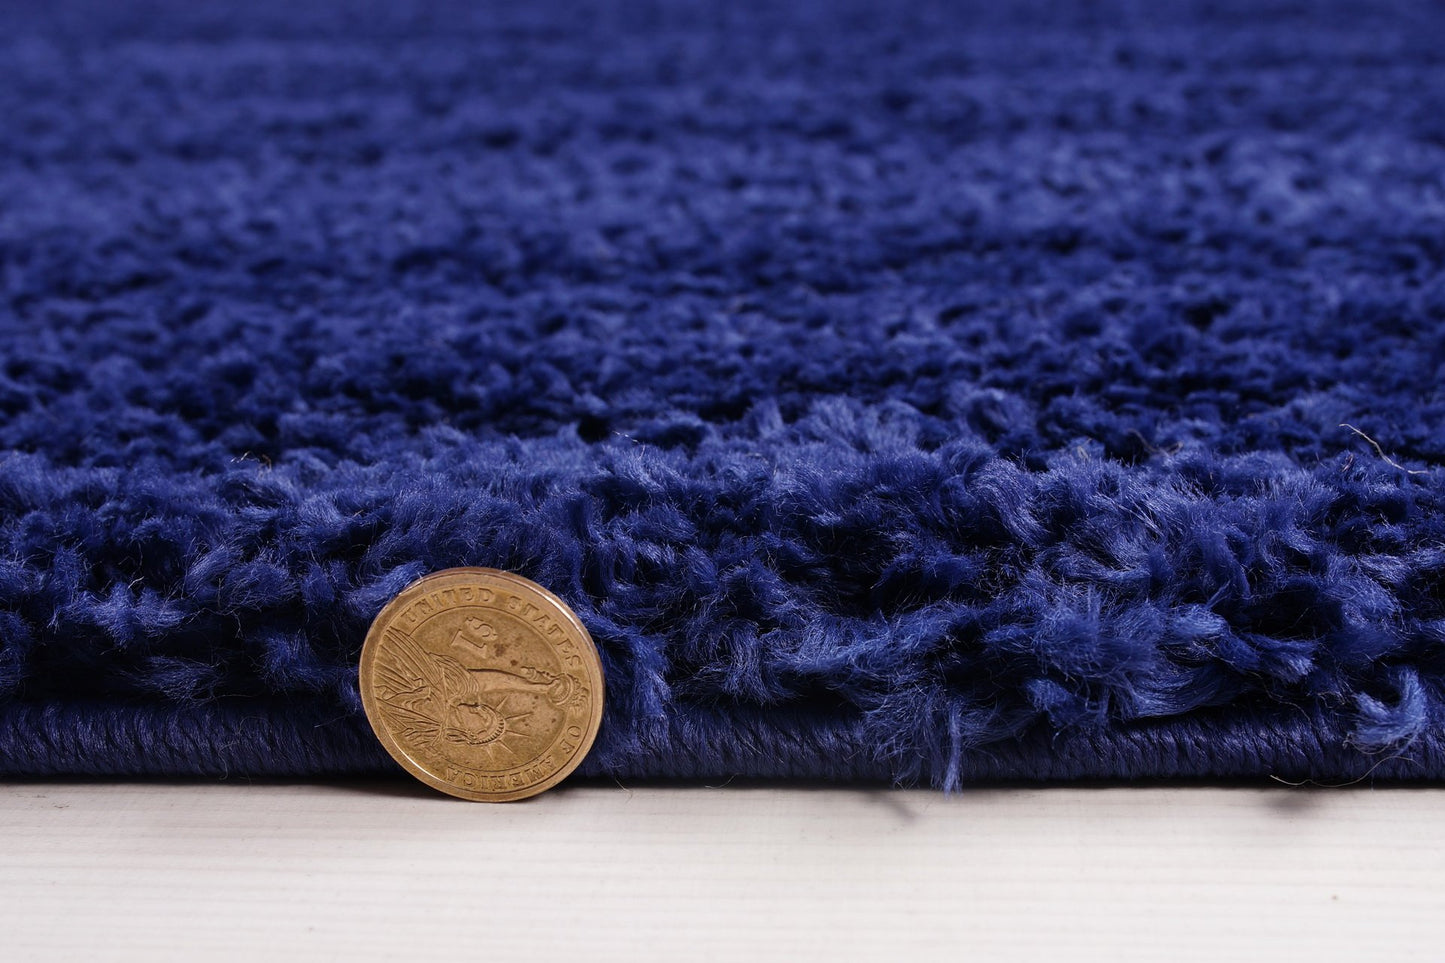 Solid Color Shaggy Meknes Durable Beautiful Turkish Rug in Navy Blue